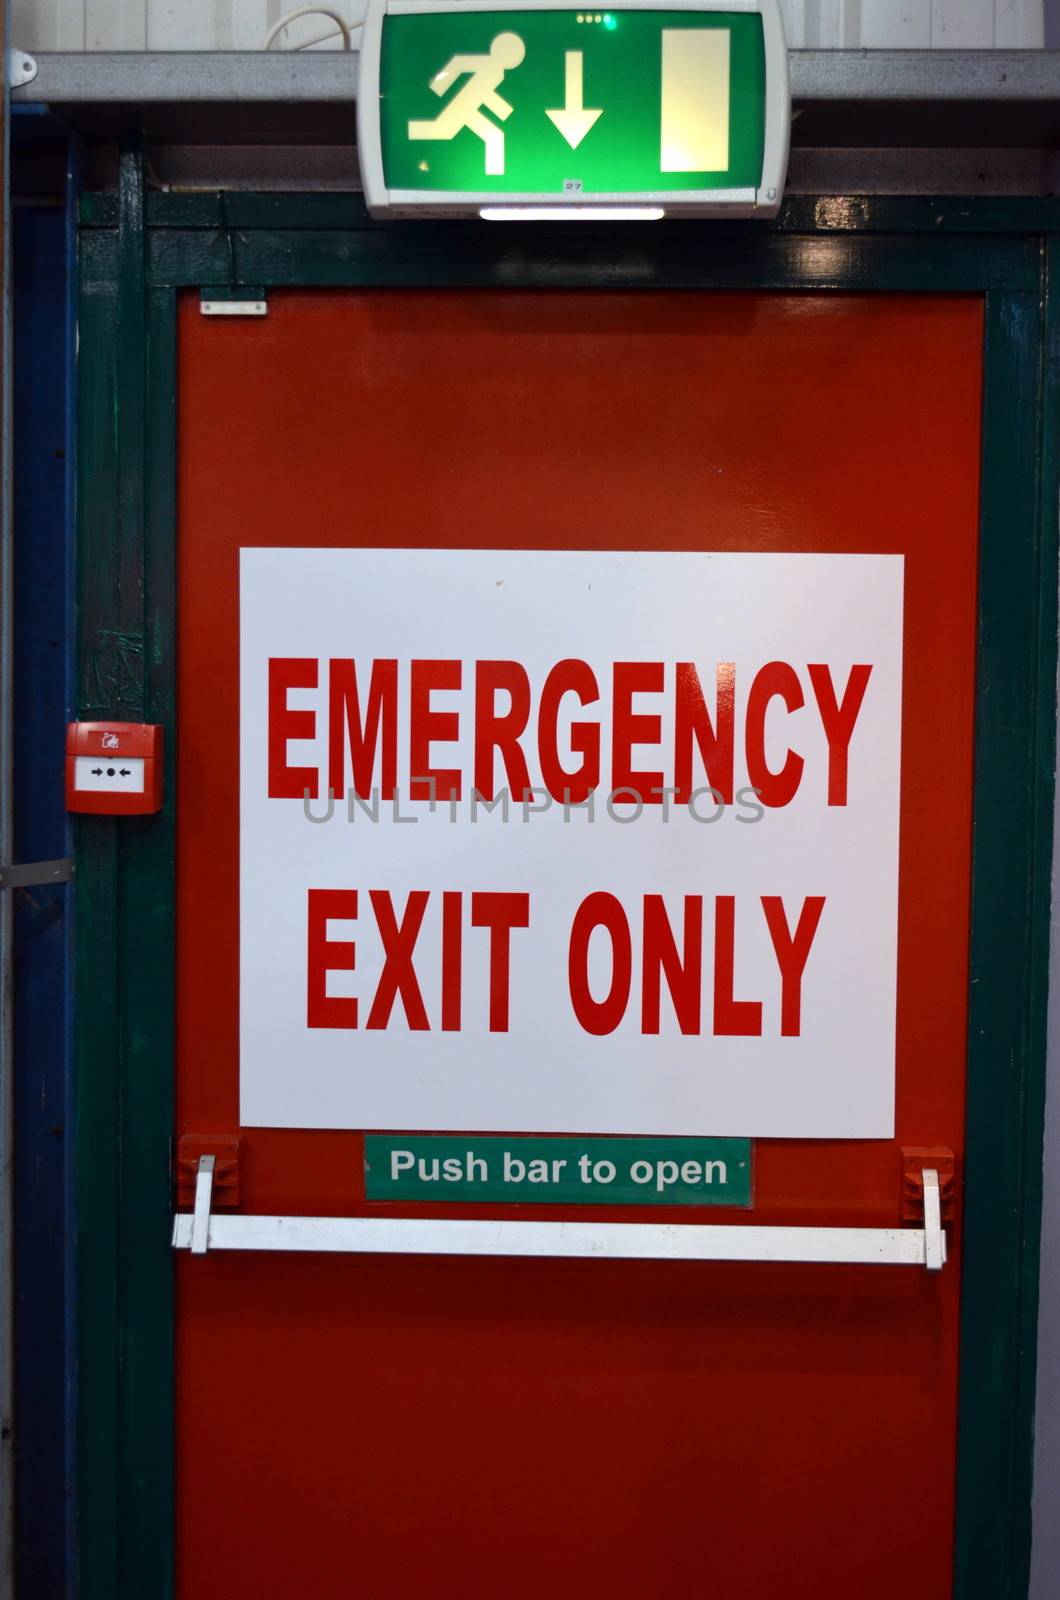 Emergency Exit sign on a fire door.